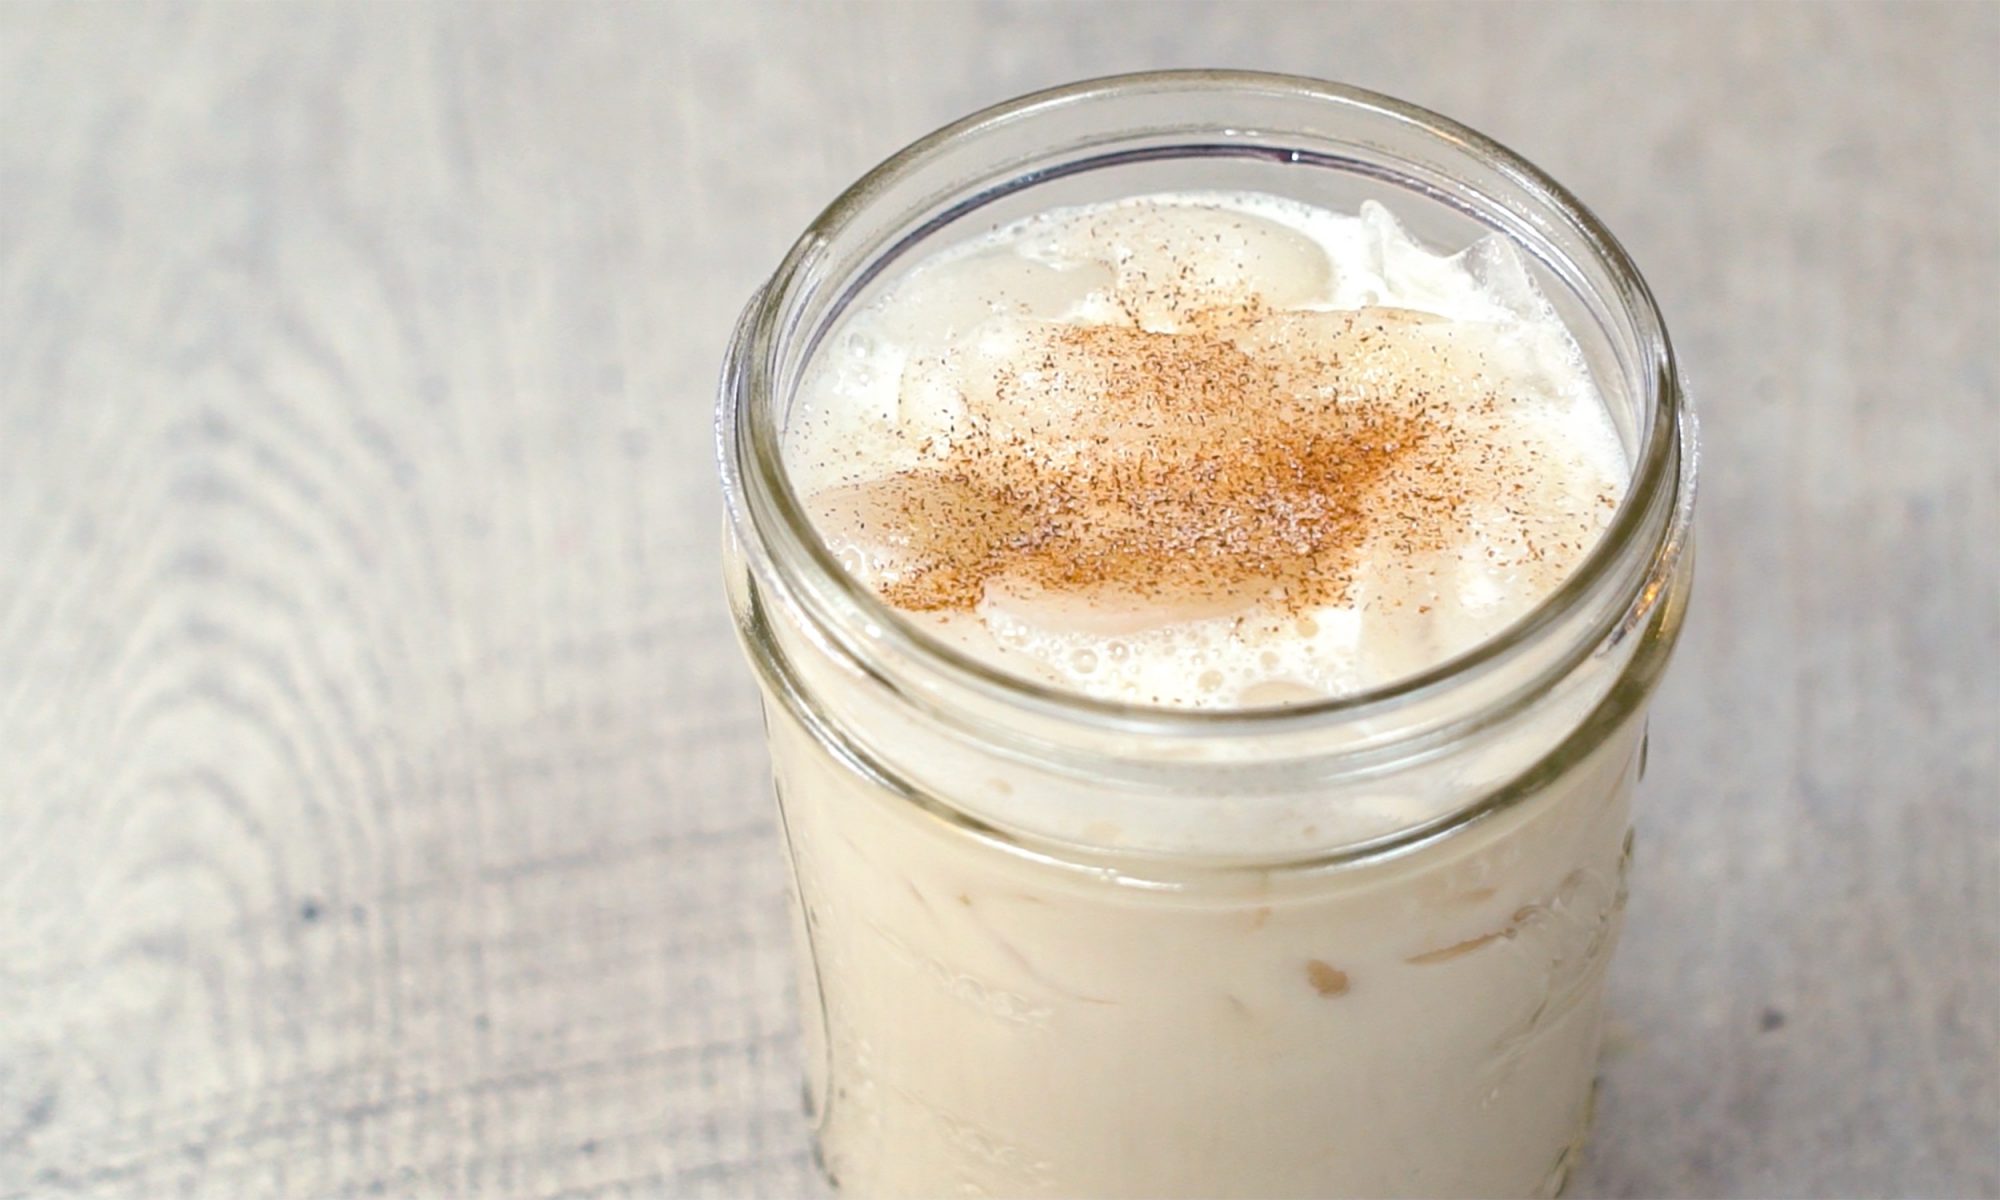 EC: This Spiced Rum Milk Punch Is Like Eggnog Without the Eggs